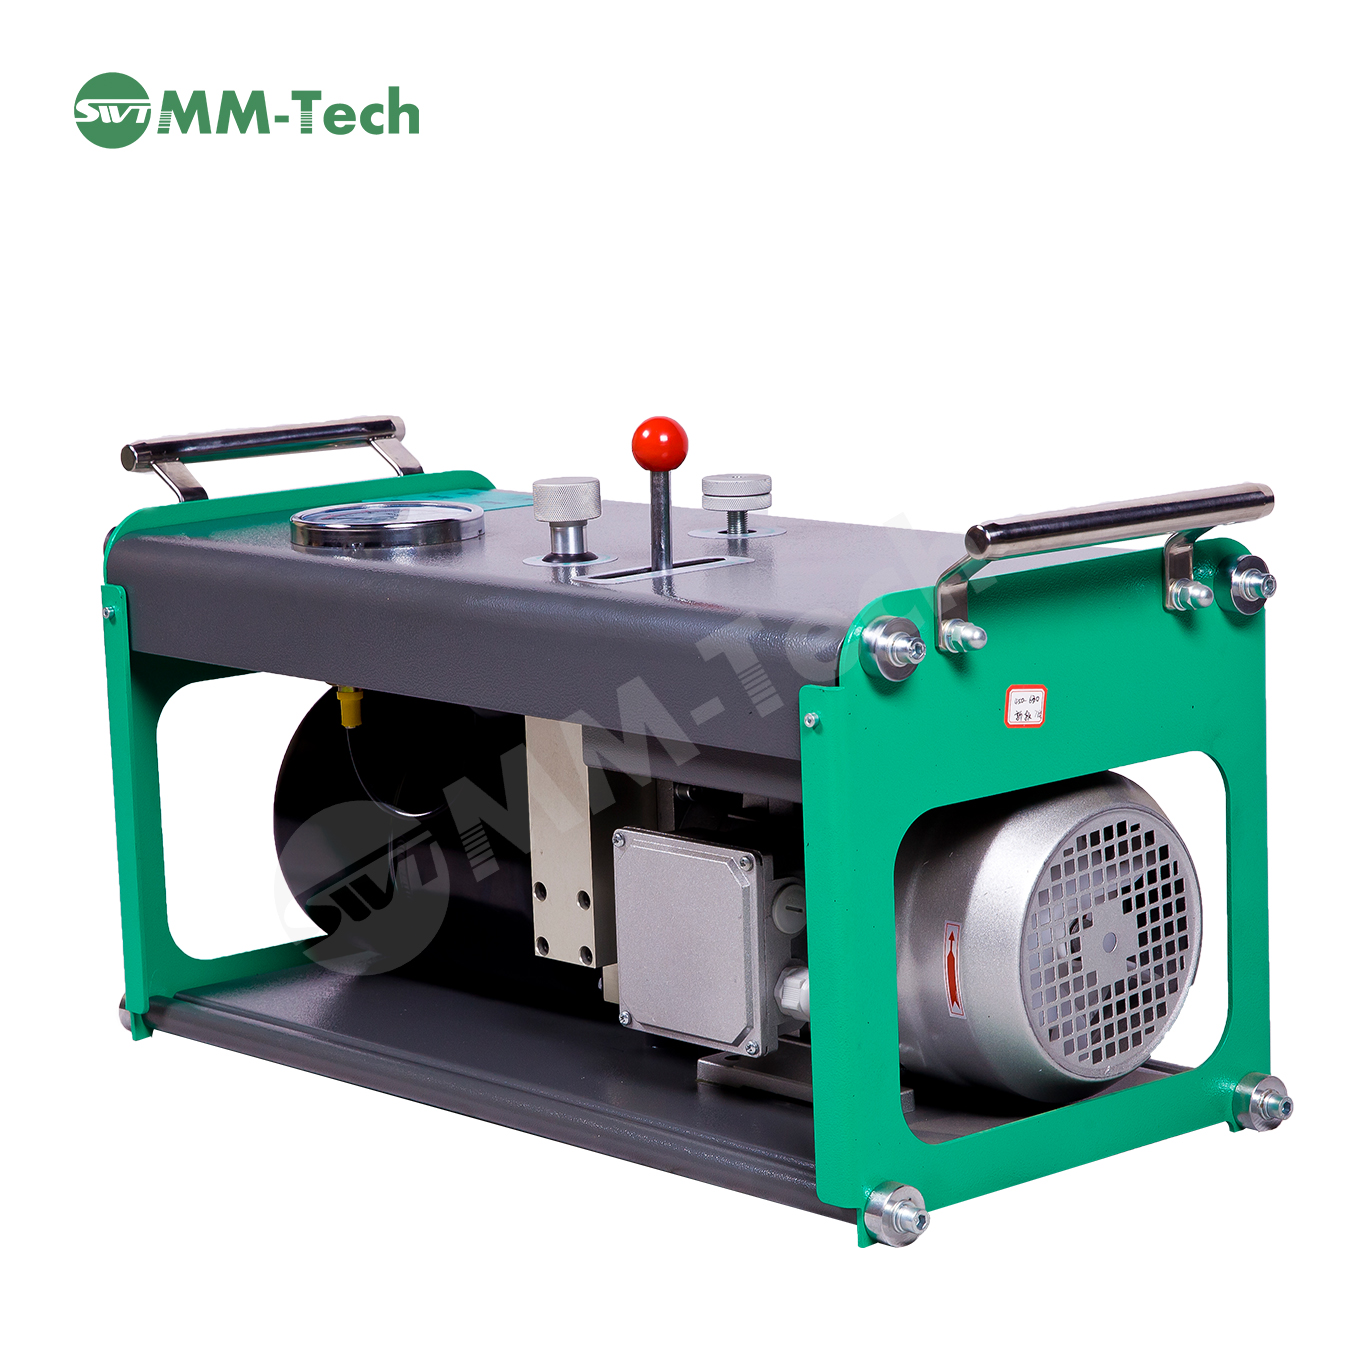 HDPE butt fusion jointing machine